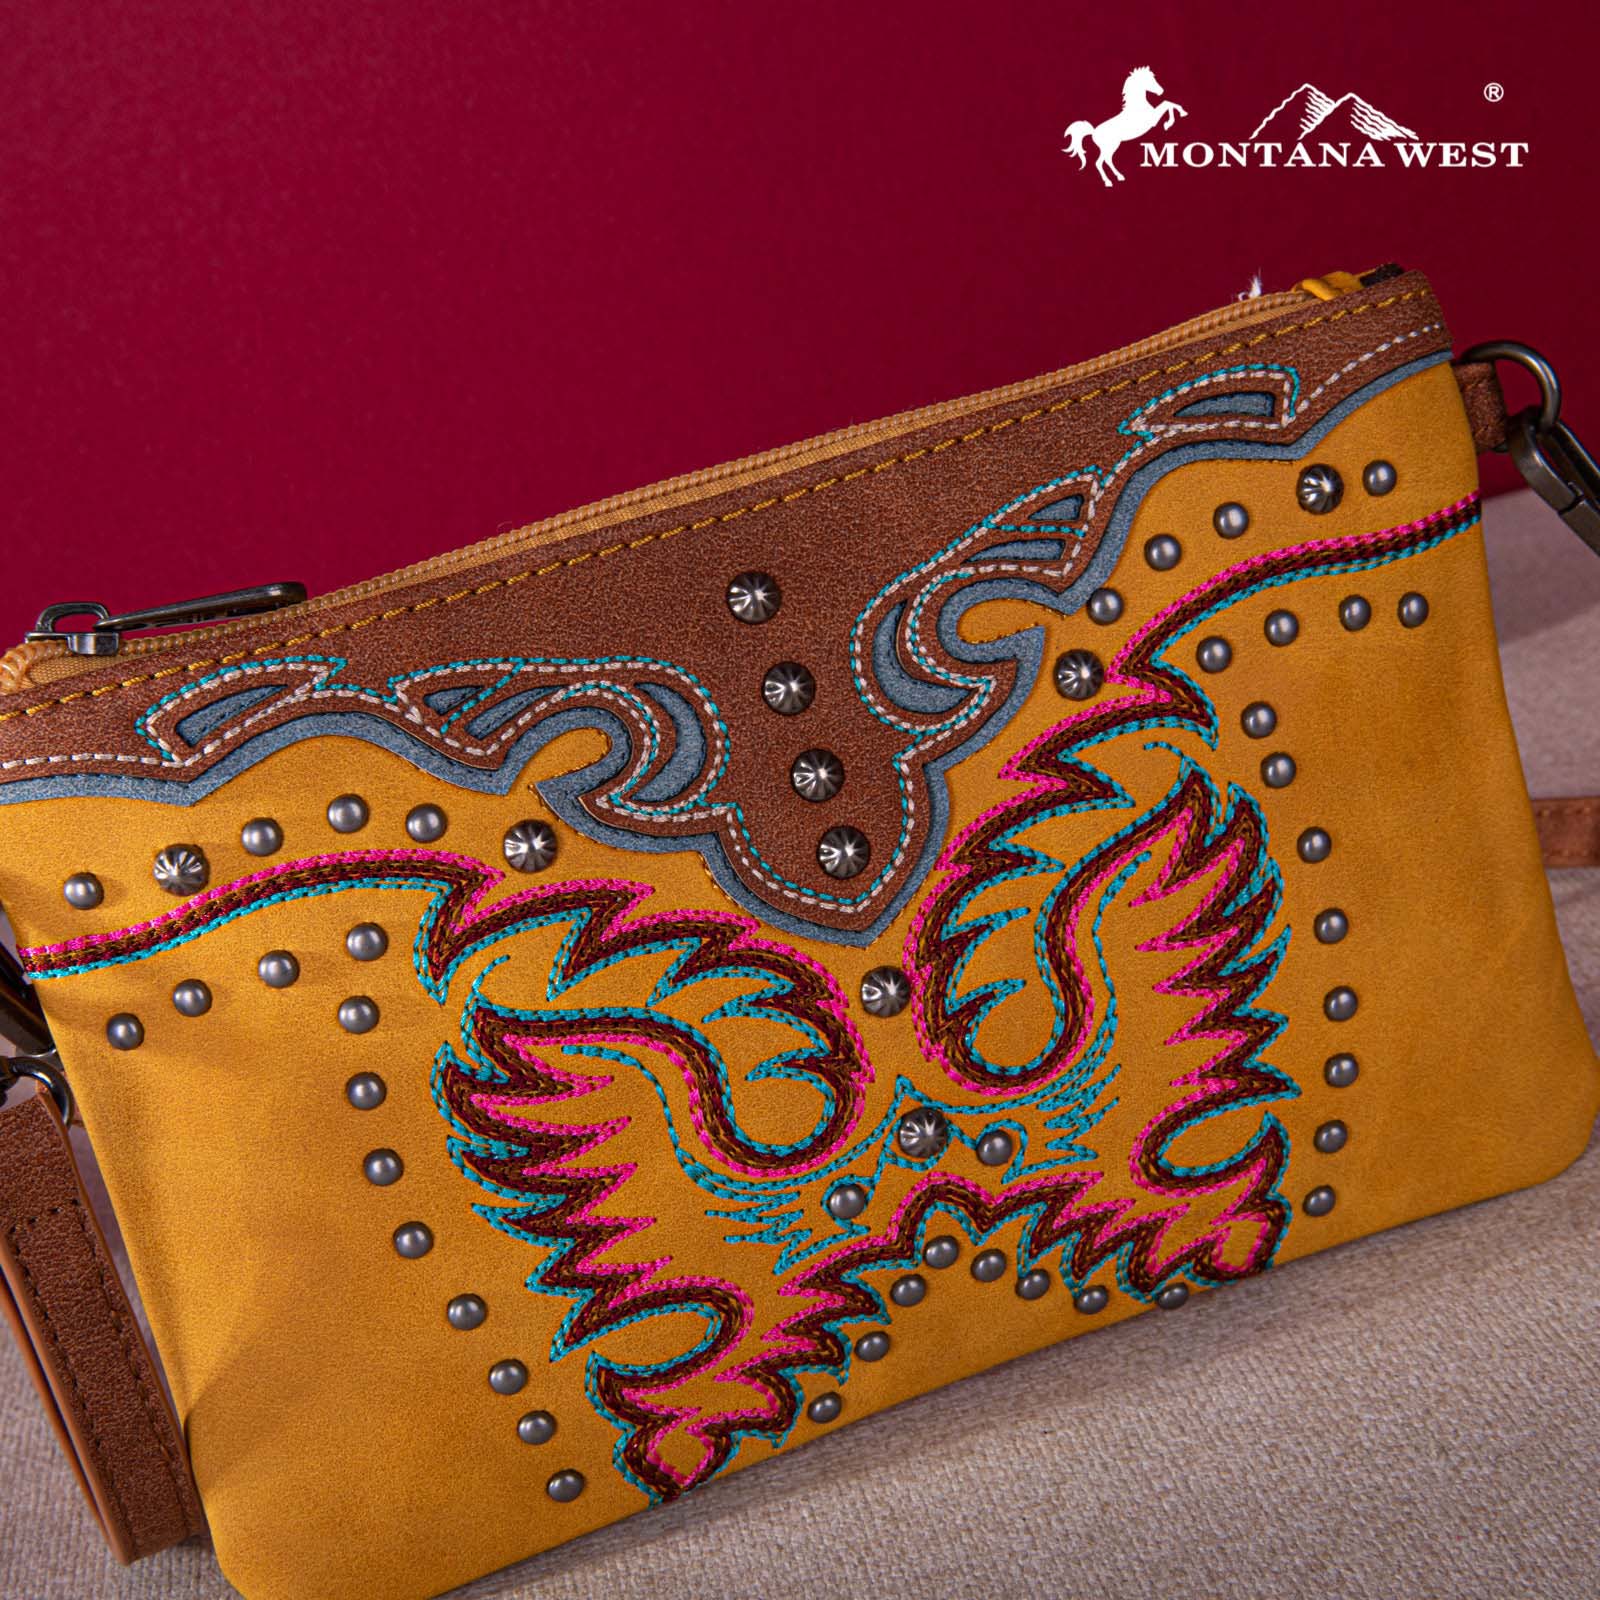 Montana West Embroidered Collection Clutch/Crossbody